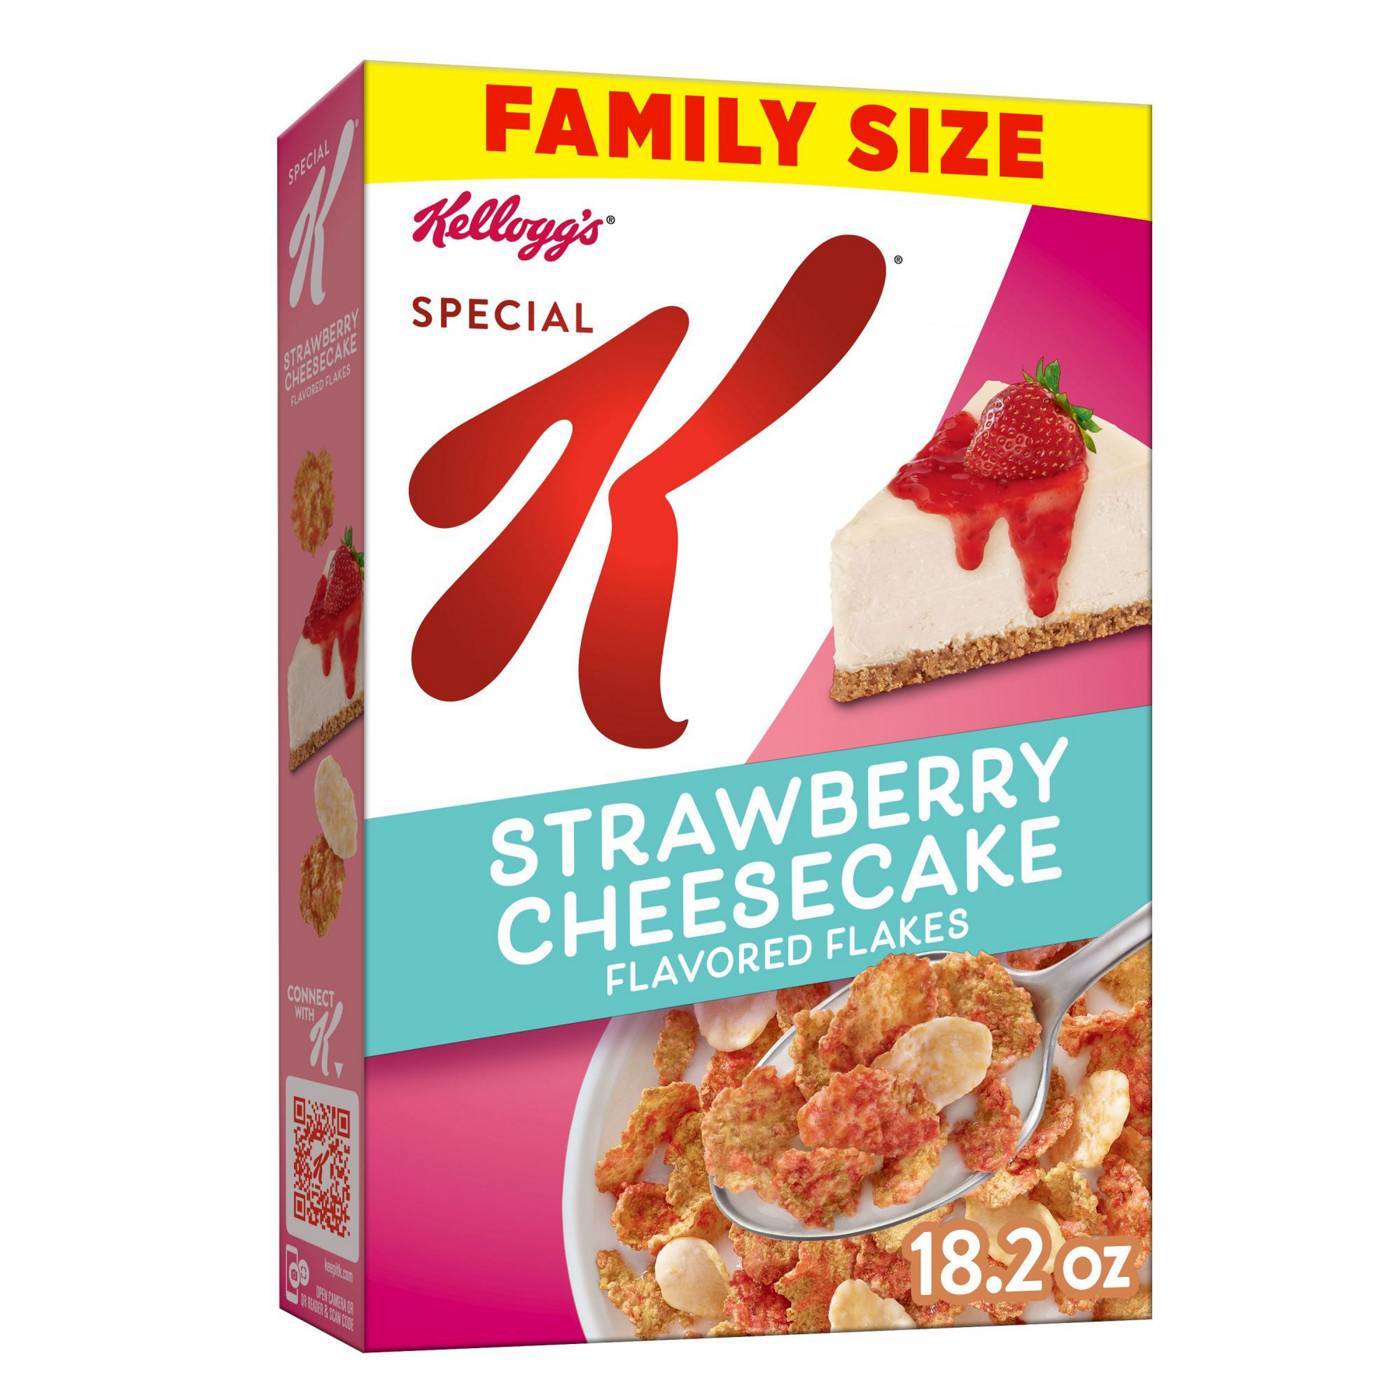 Kellogg's Cereal Cups - Family Variety Pack - Shop Cereal at H-E-B